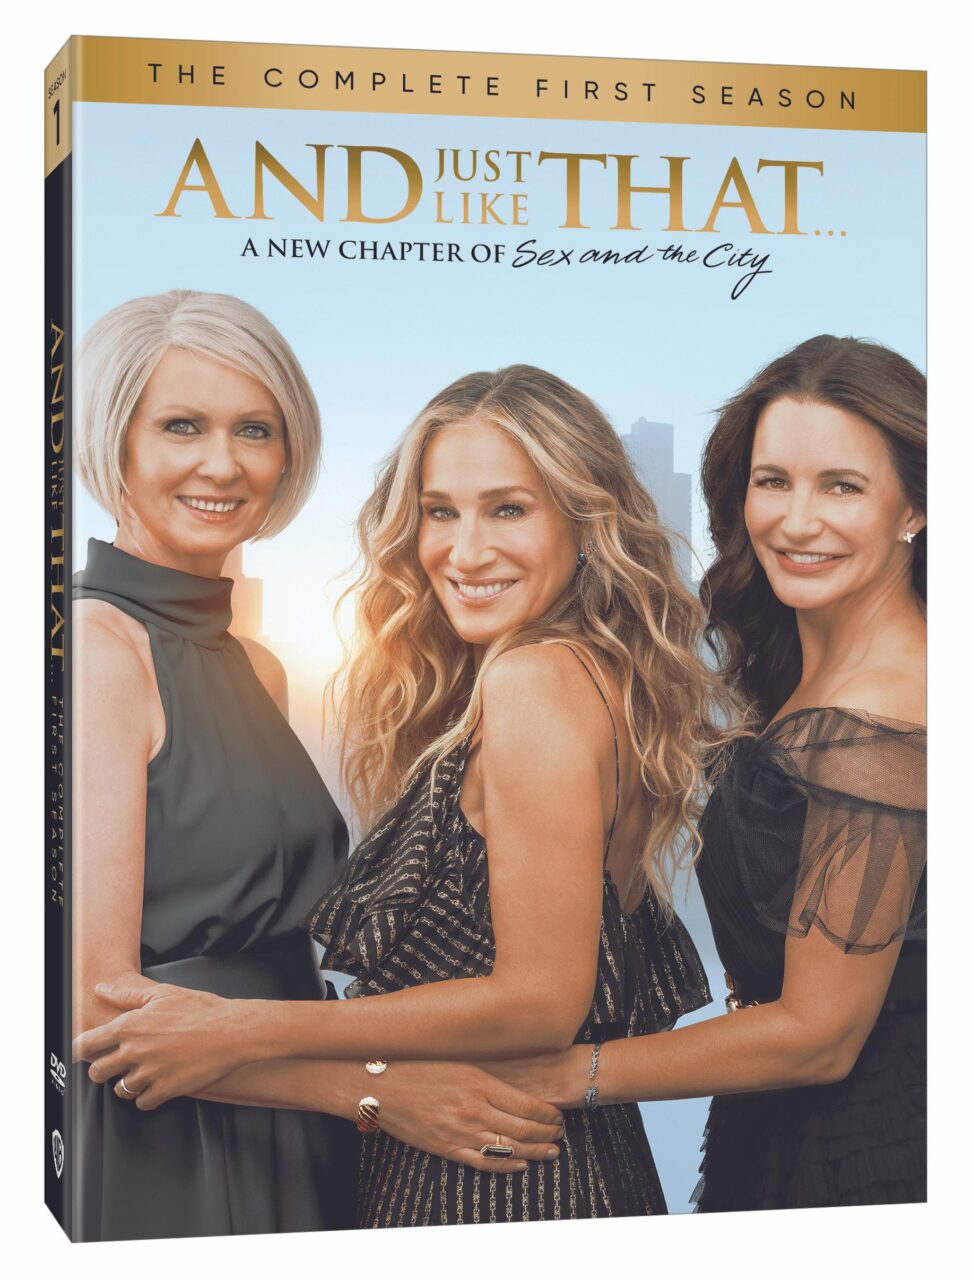 And Just Like That... The Complete First Season DVD cover (Warner Bros. Home Entertainment)